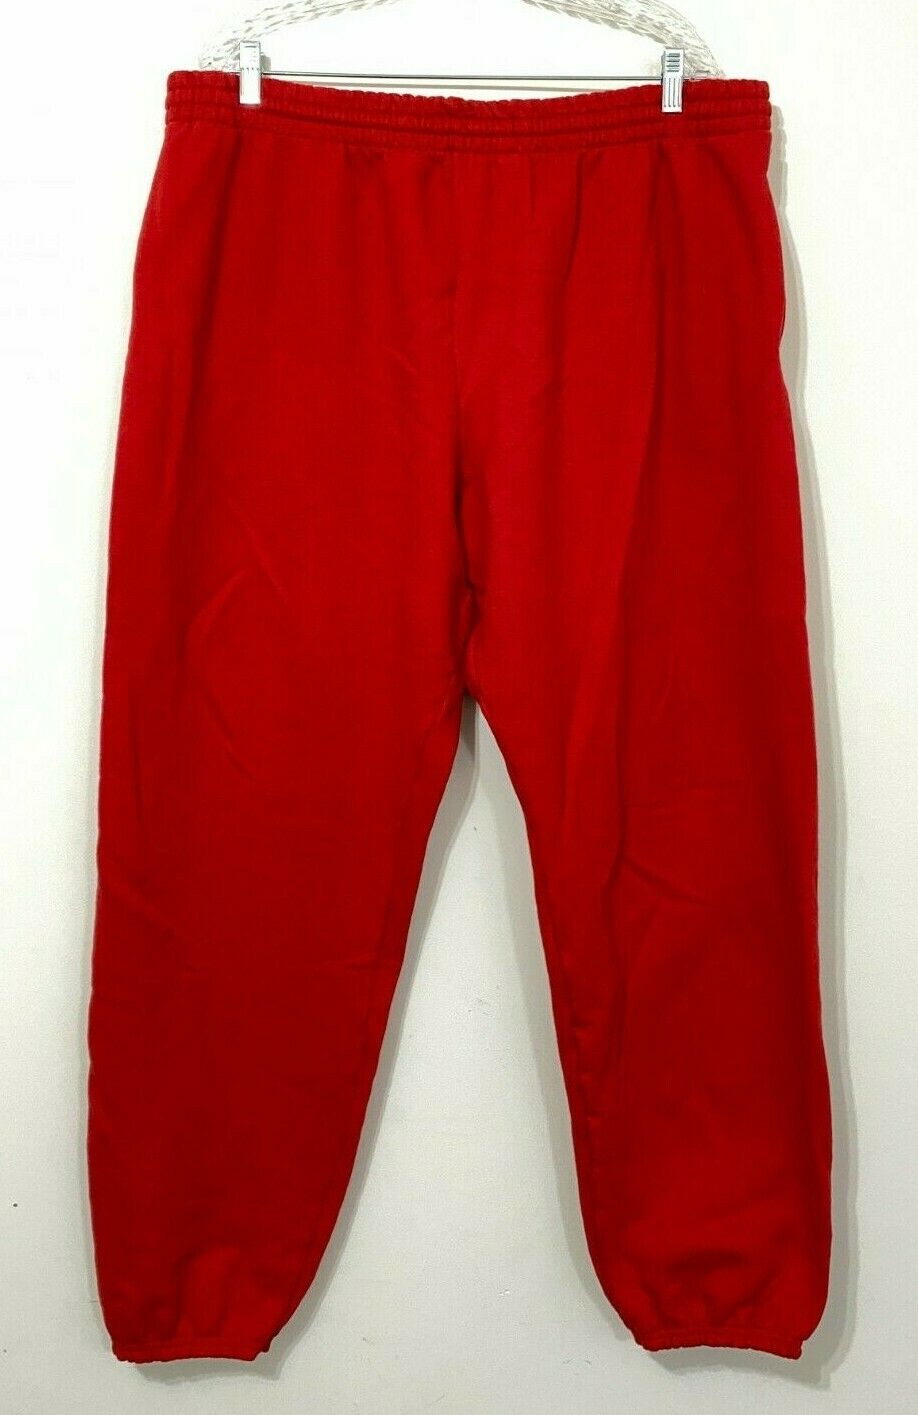 Fruit Of The Loom Vintage Bright Red Men's 2xl 60/40 Sweatpants - Joggers Sweats